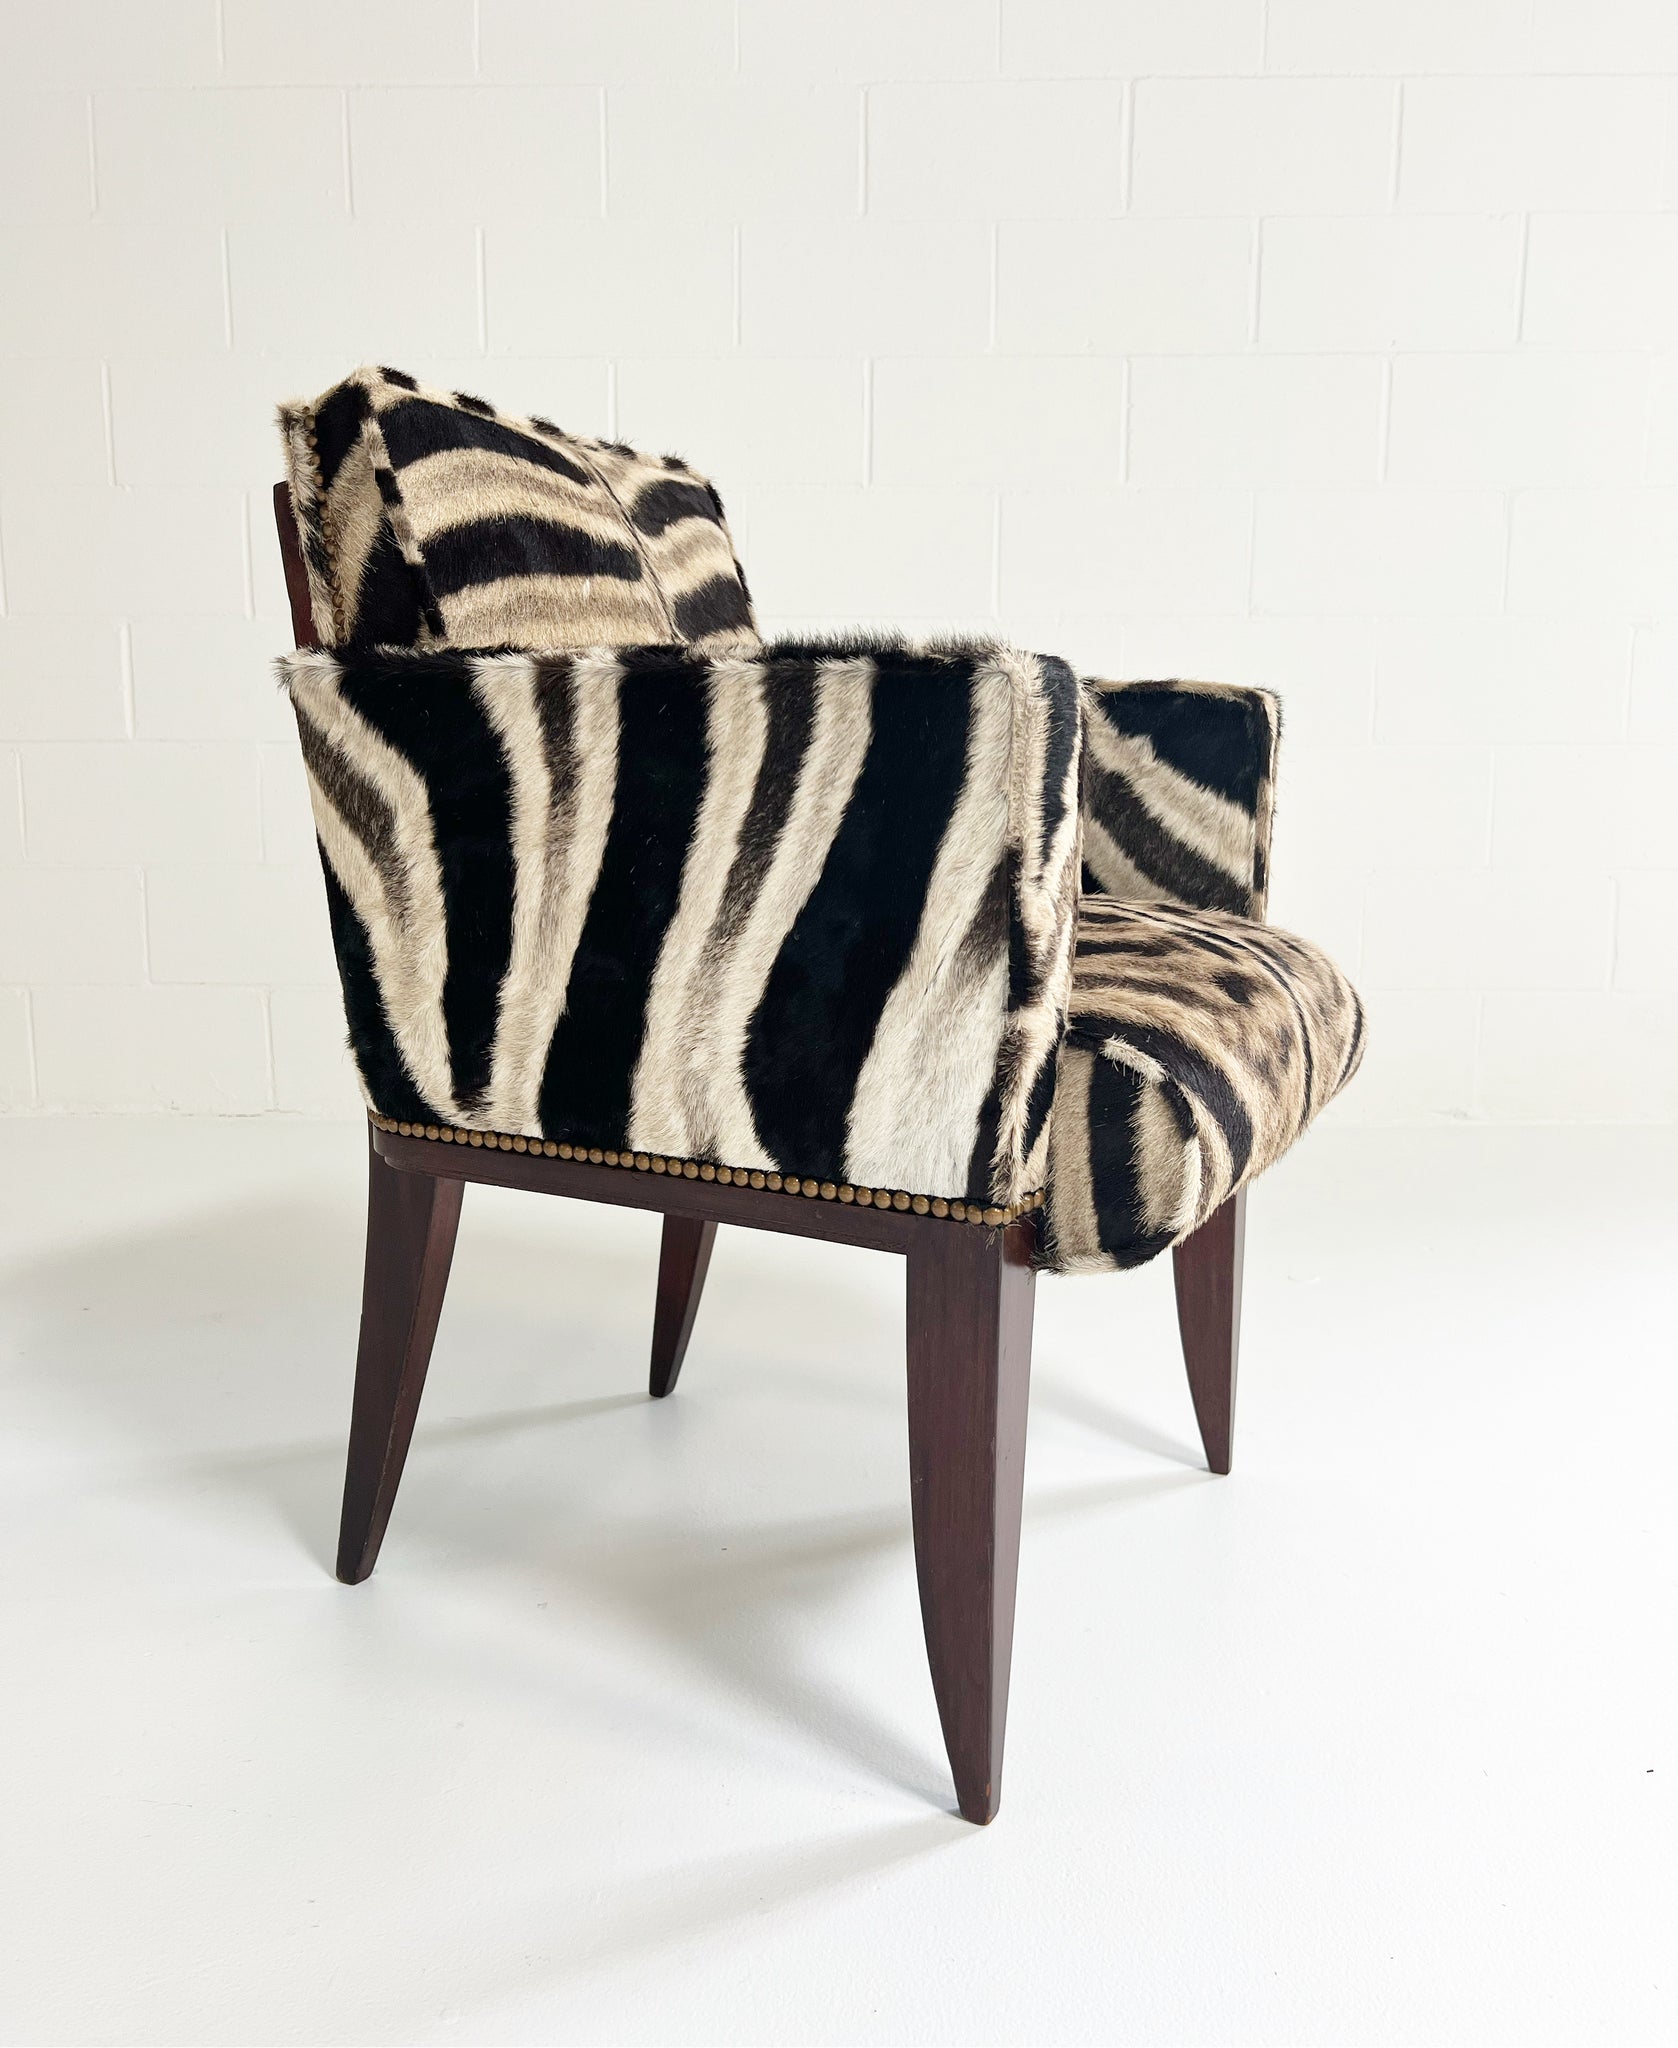 Armchair in the Style of Wormley in Zebra